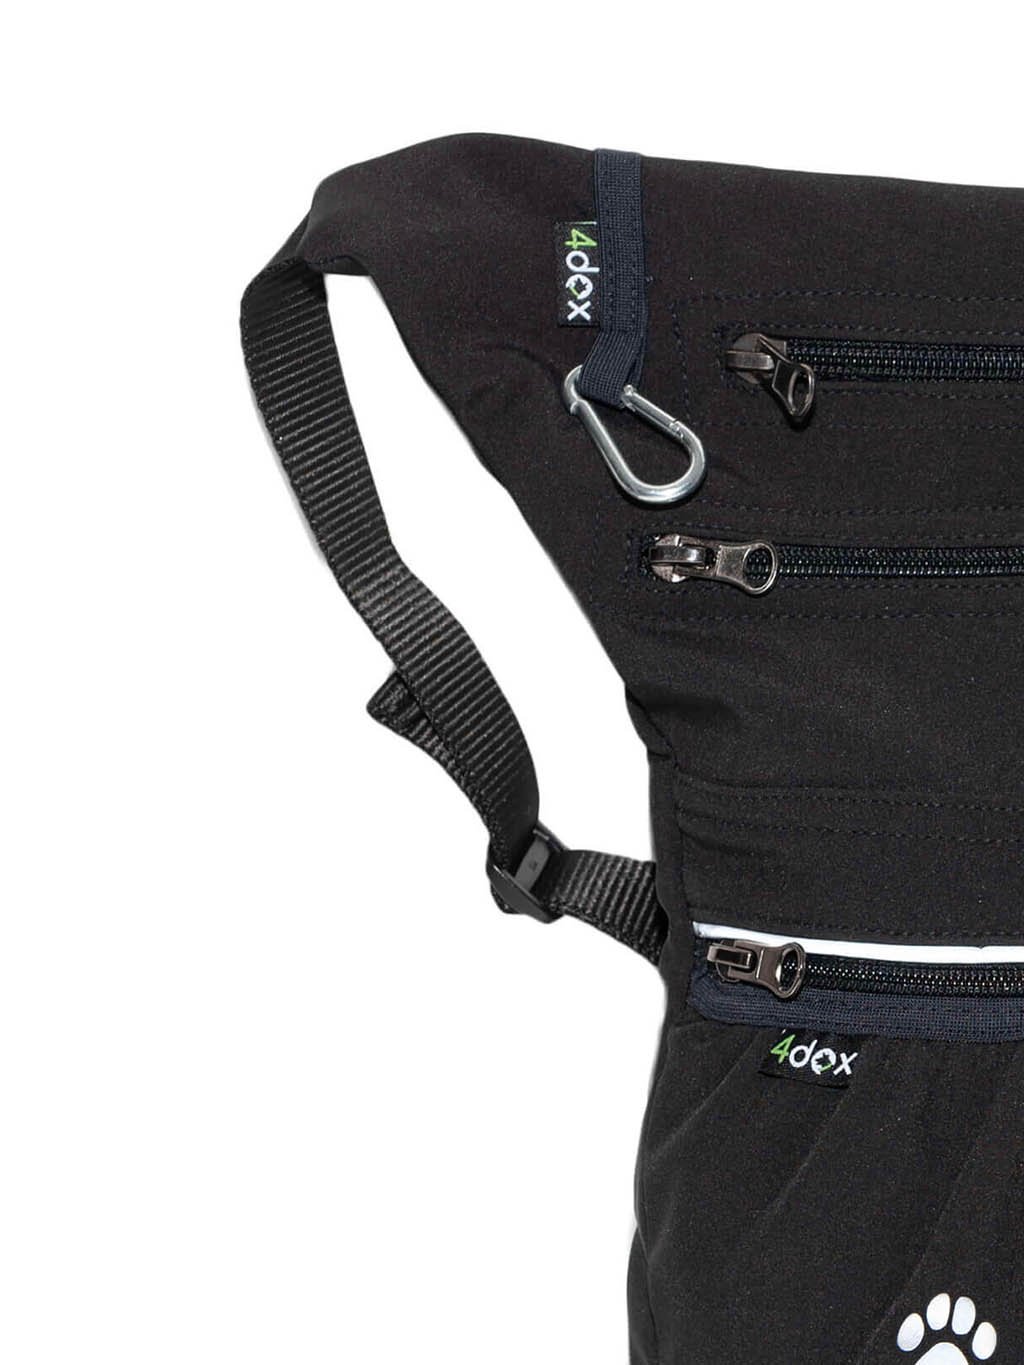 Running bag with reflective paws All-black 